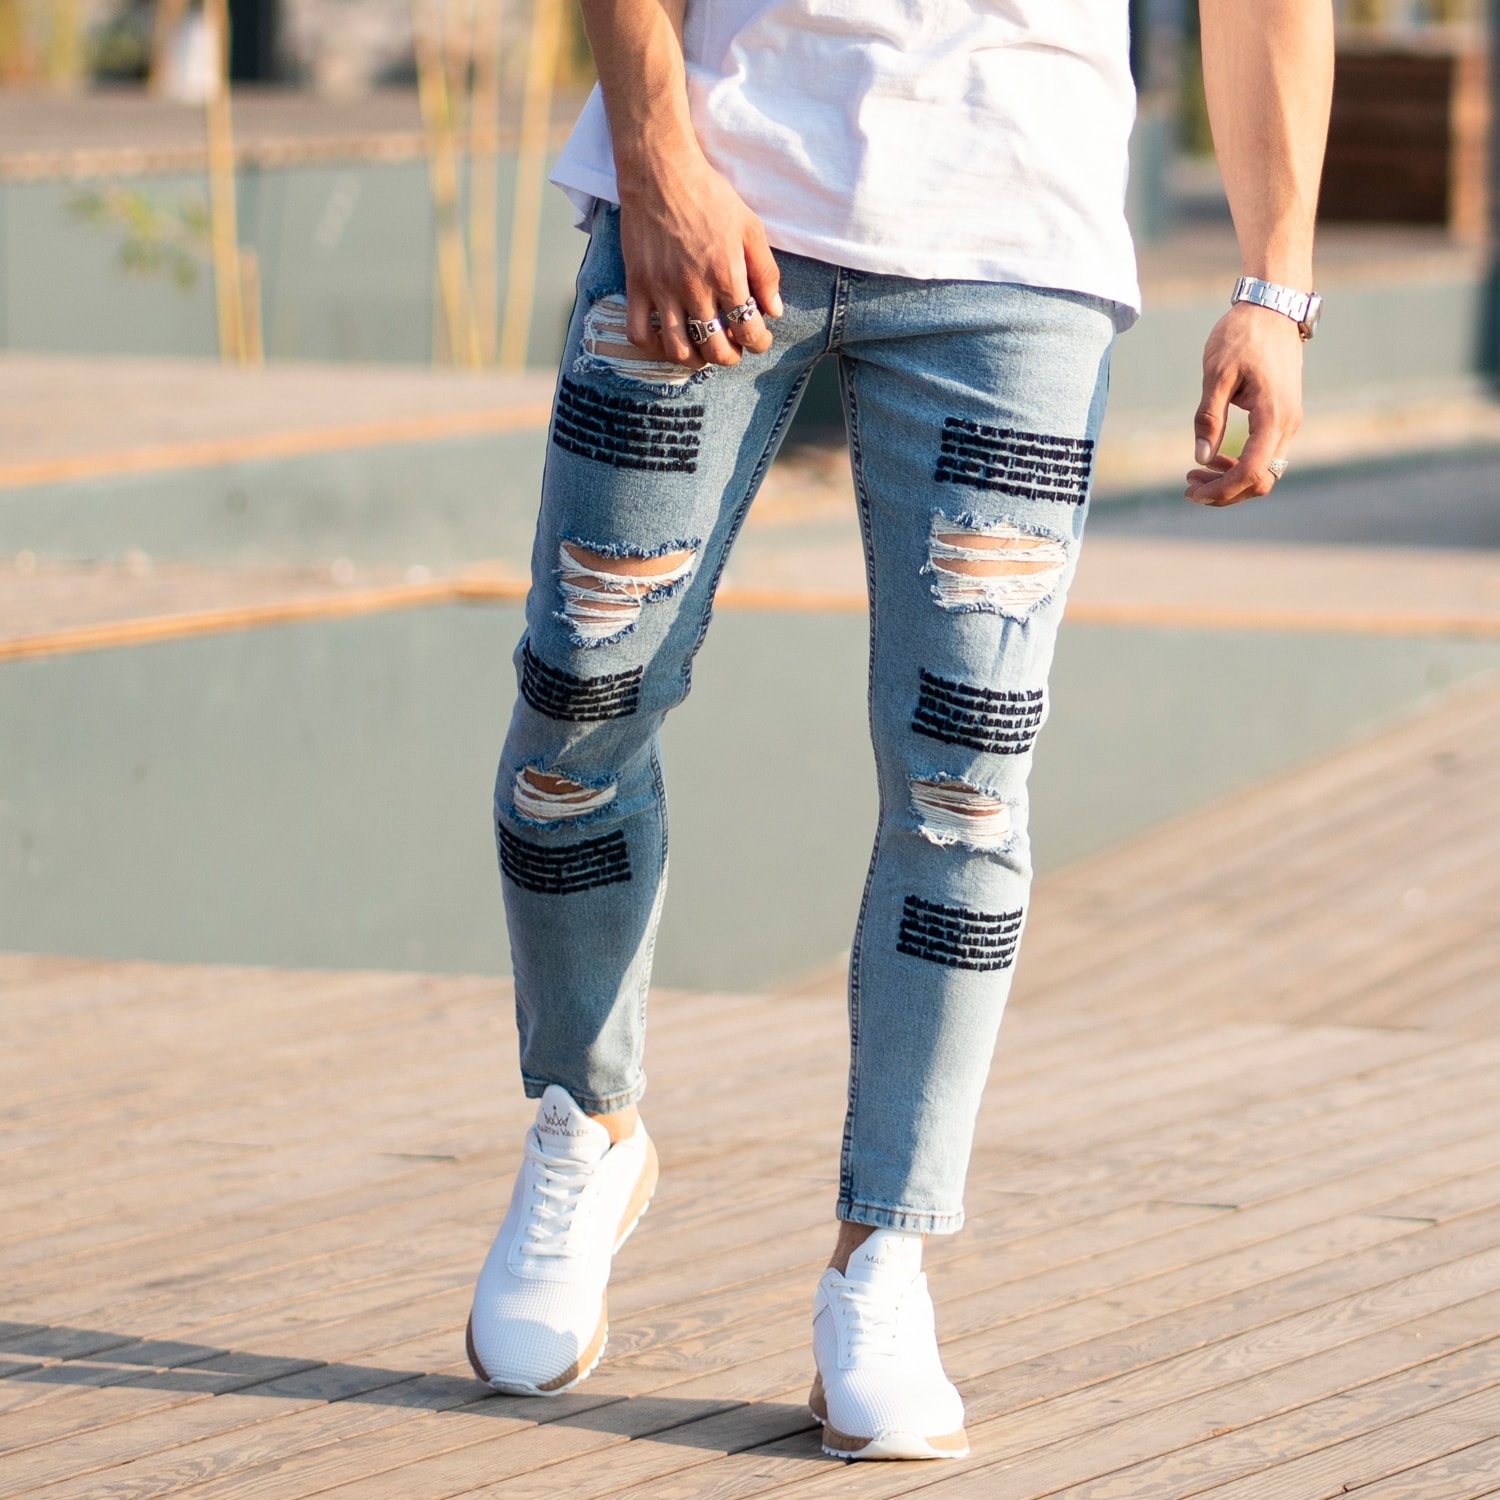 Men's Jeans With Fonts and Ribs